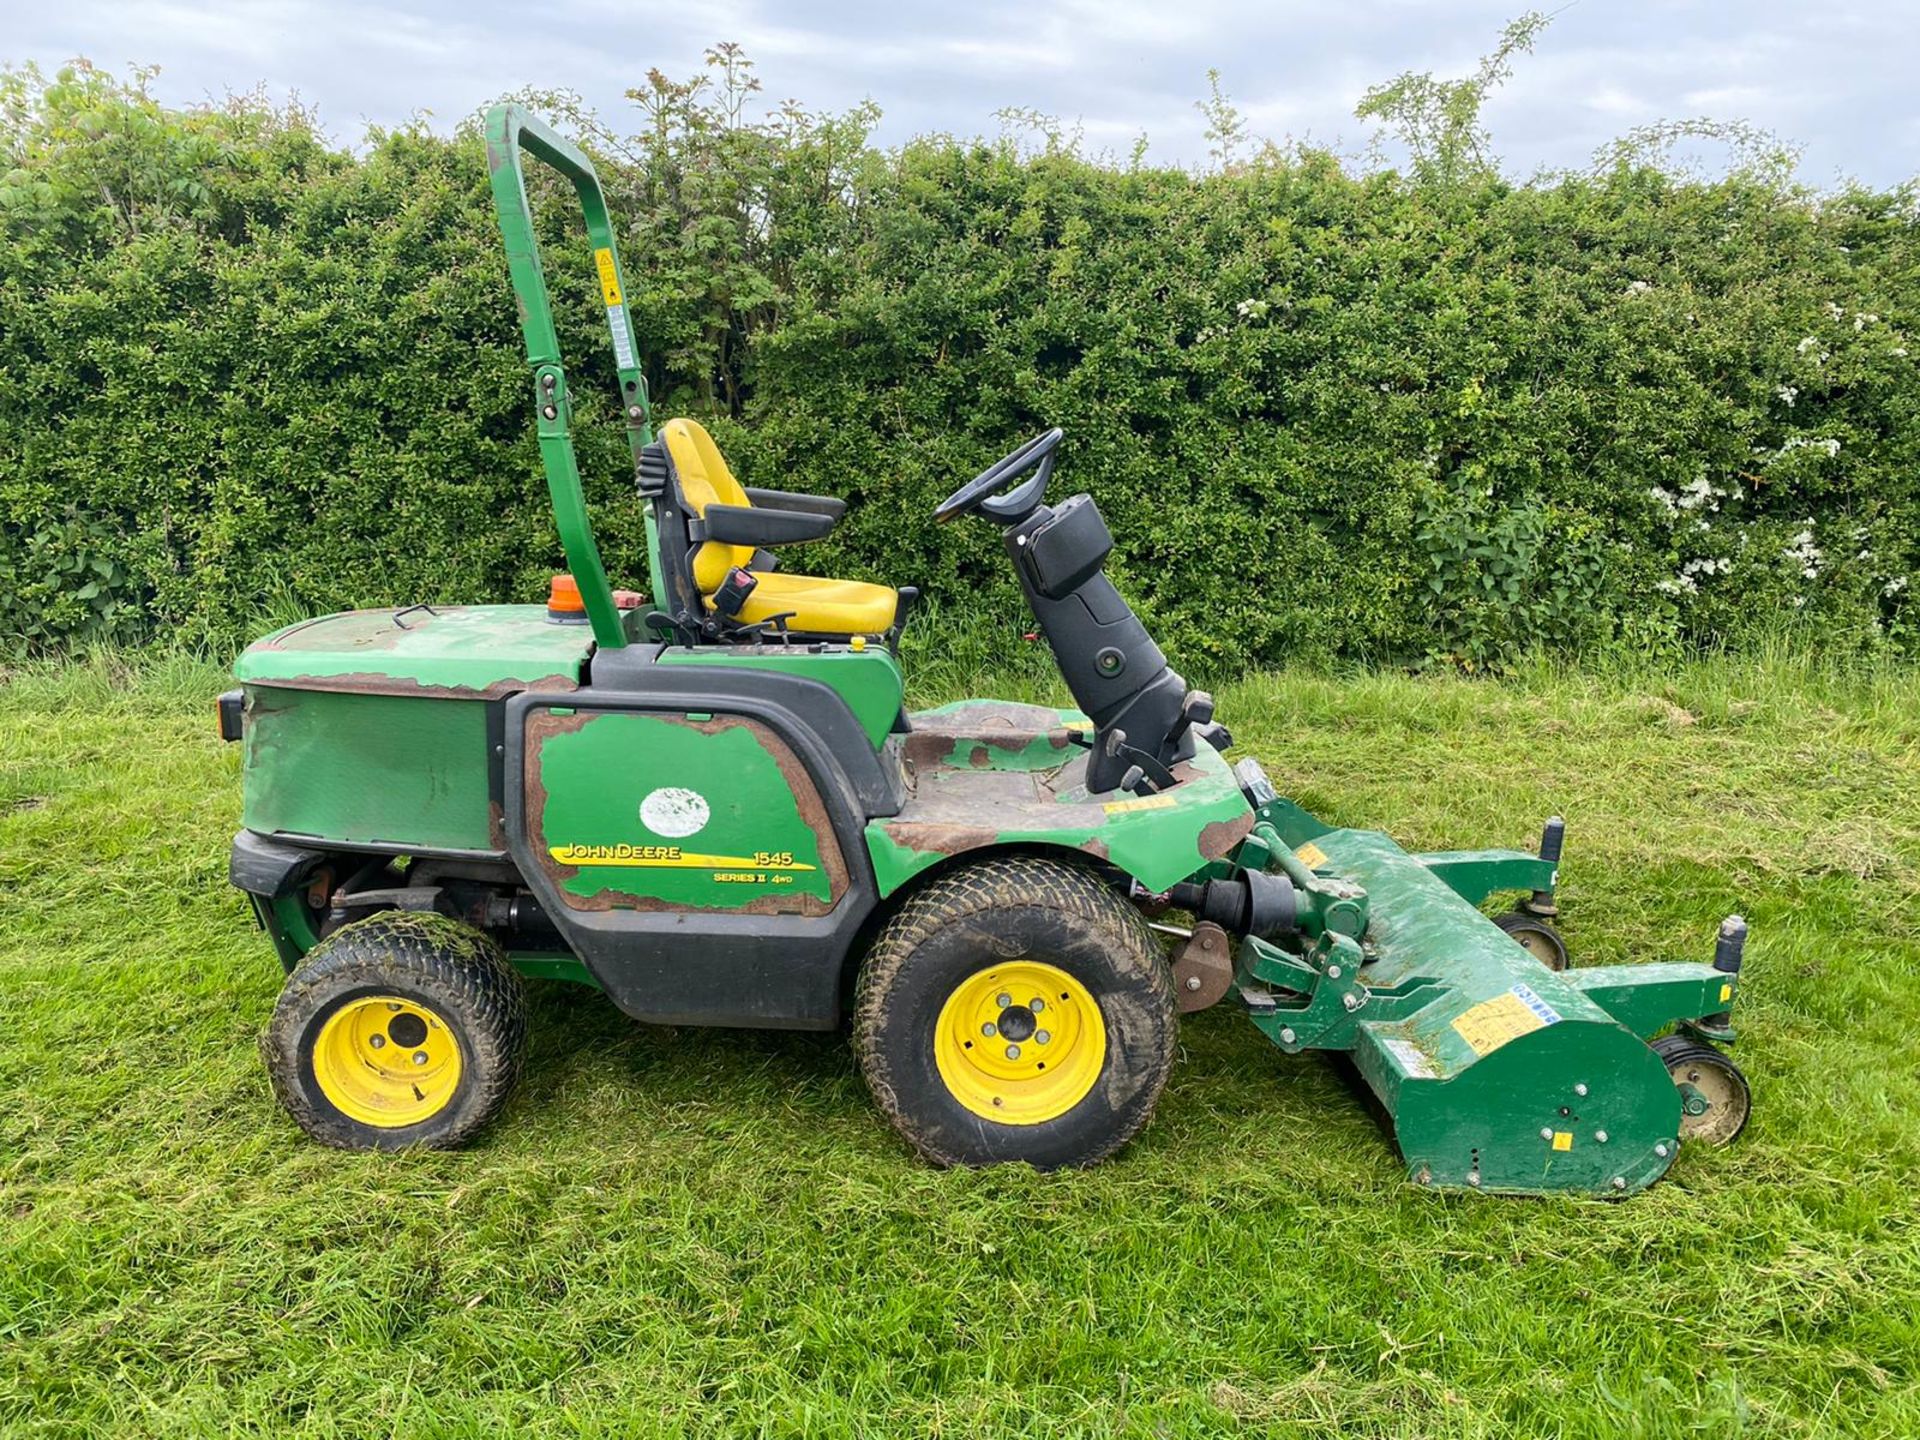 2012 JOHN DEERE 1545 OUT FRONT FLAIL MOWER LOCATION NORTH YORKSHIRE 2012